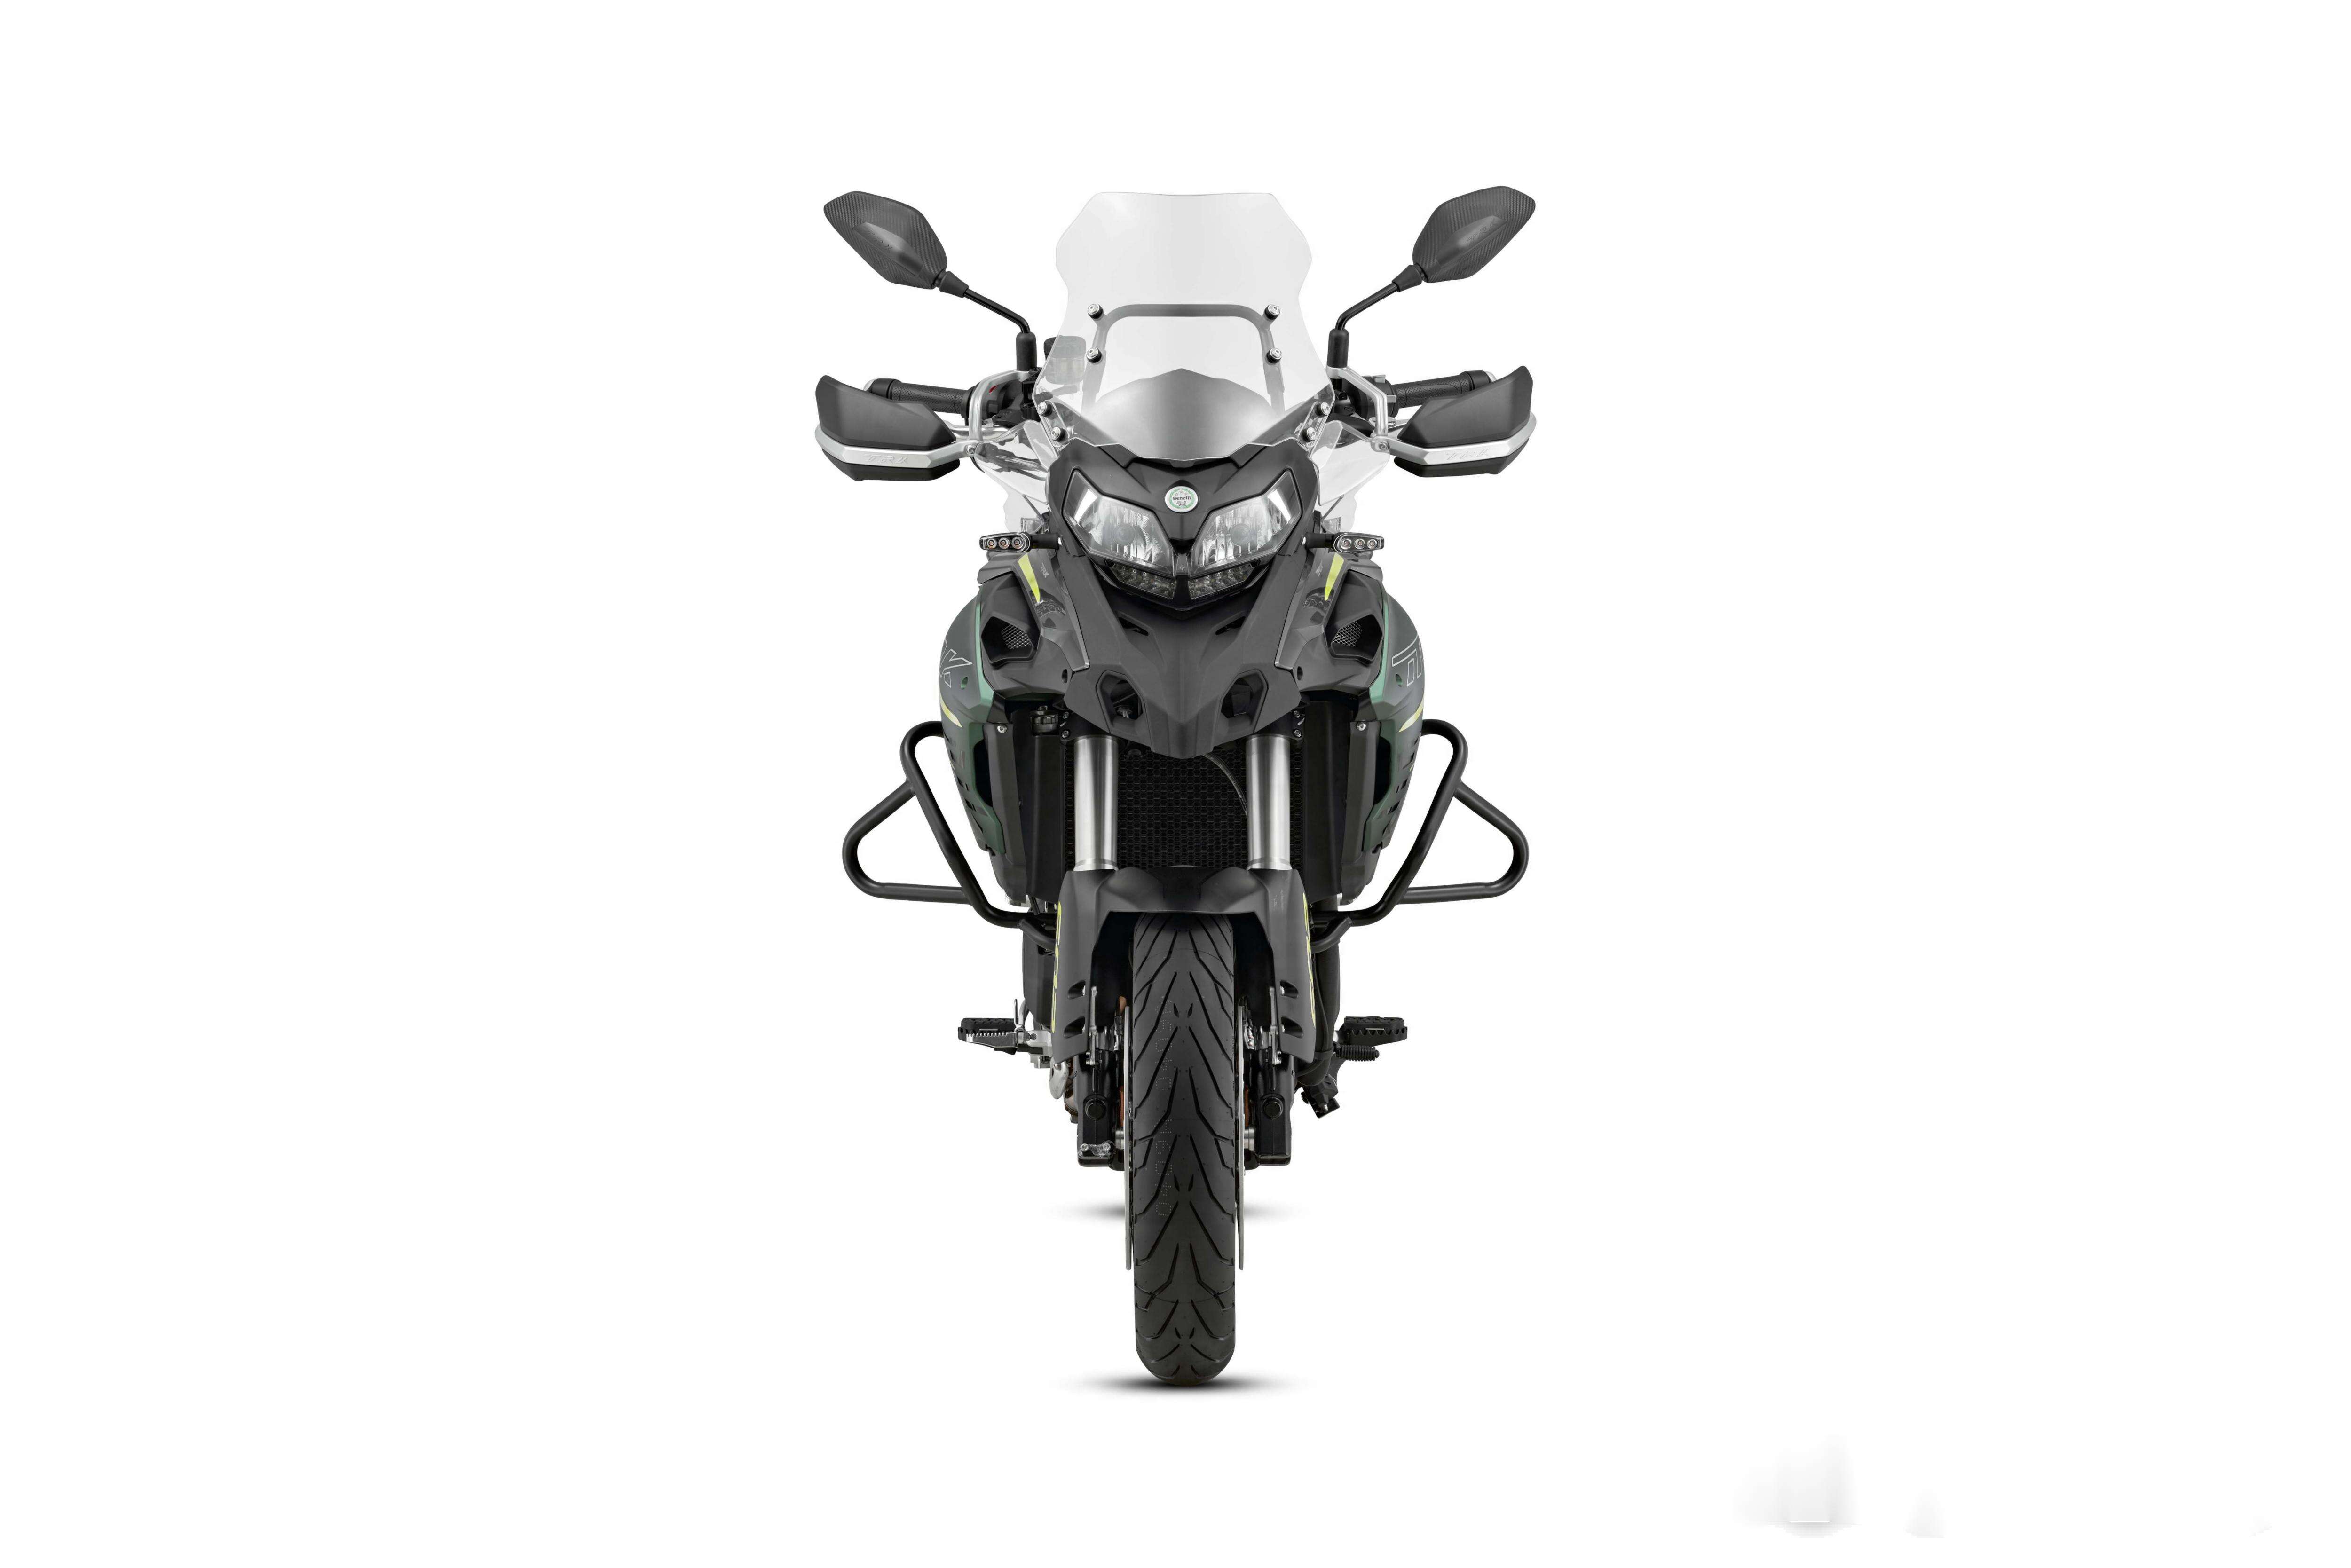 Benelli Adult 6-speed Motorcycle 502cc TRK Premium Rally car An affordable four-stroke chain drive motorcycle supplier